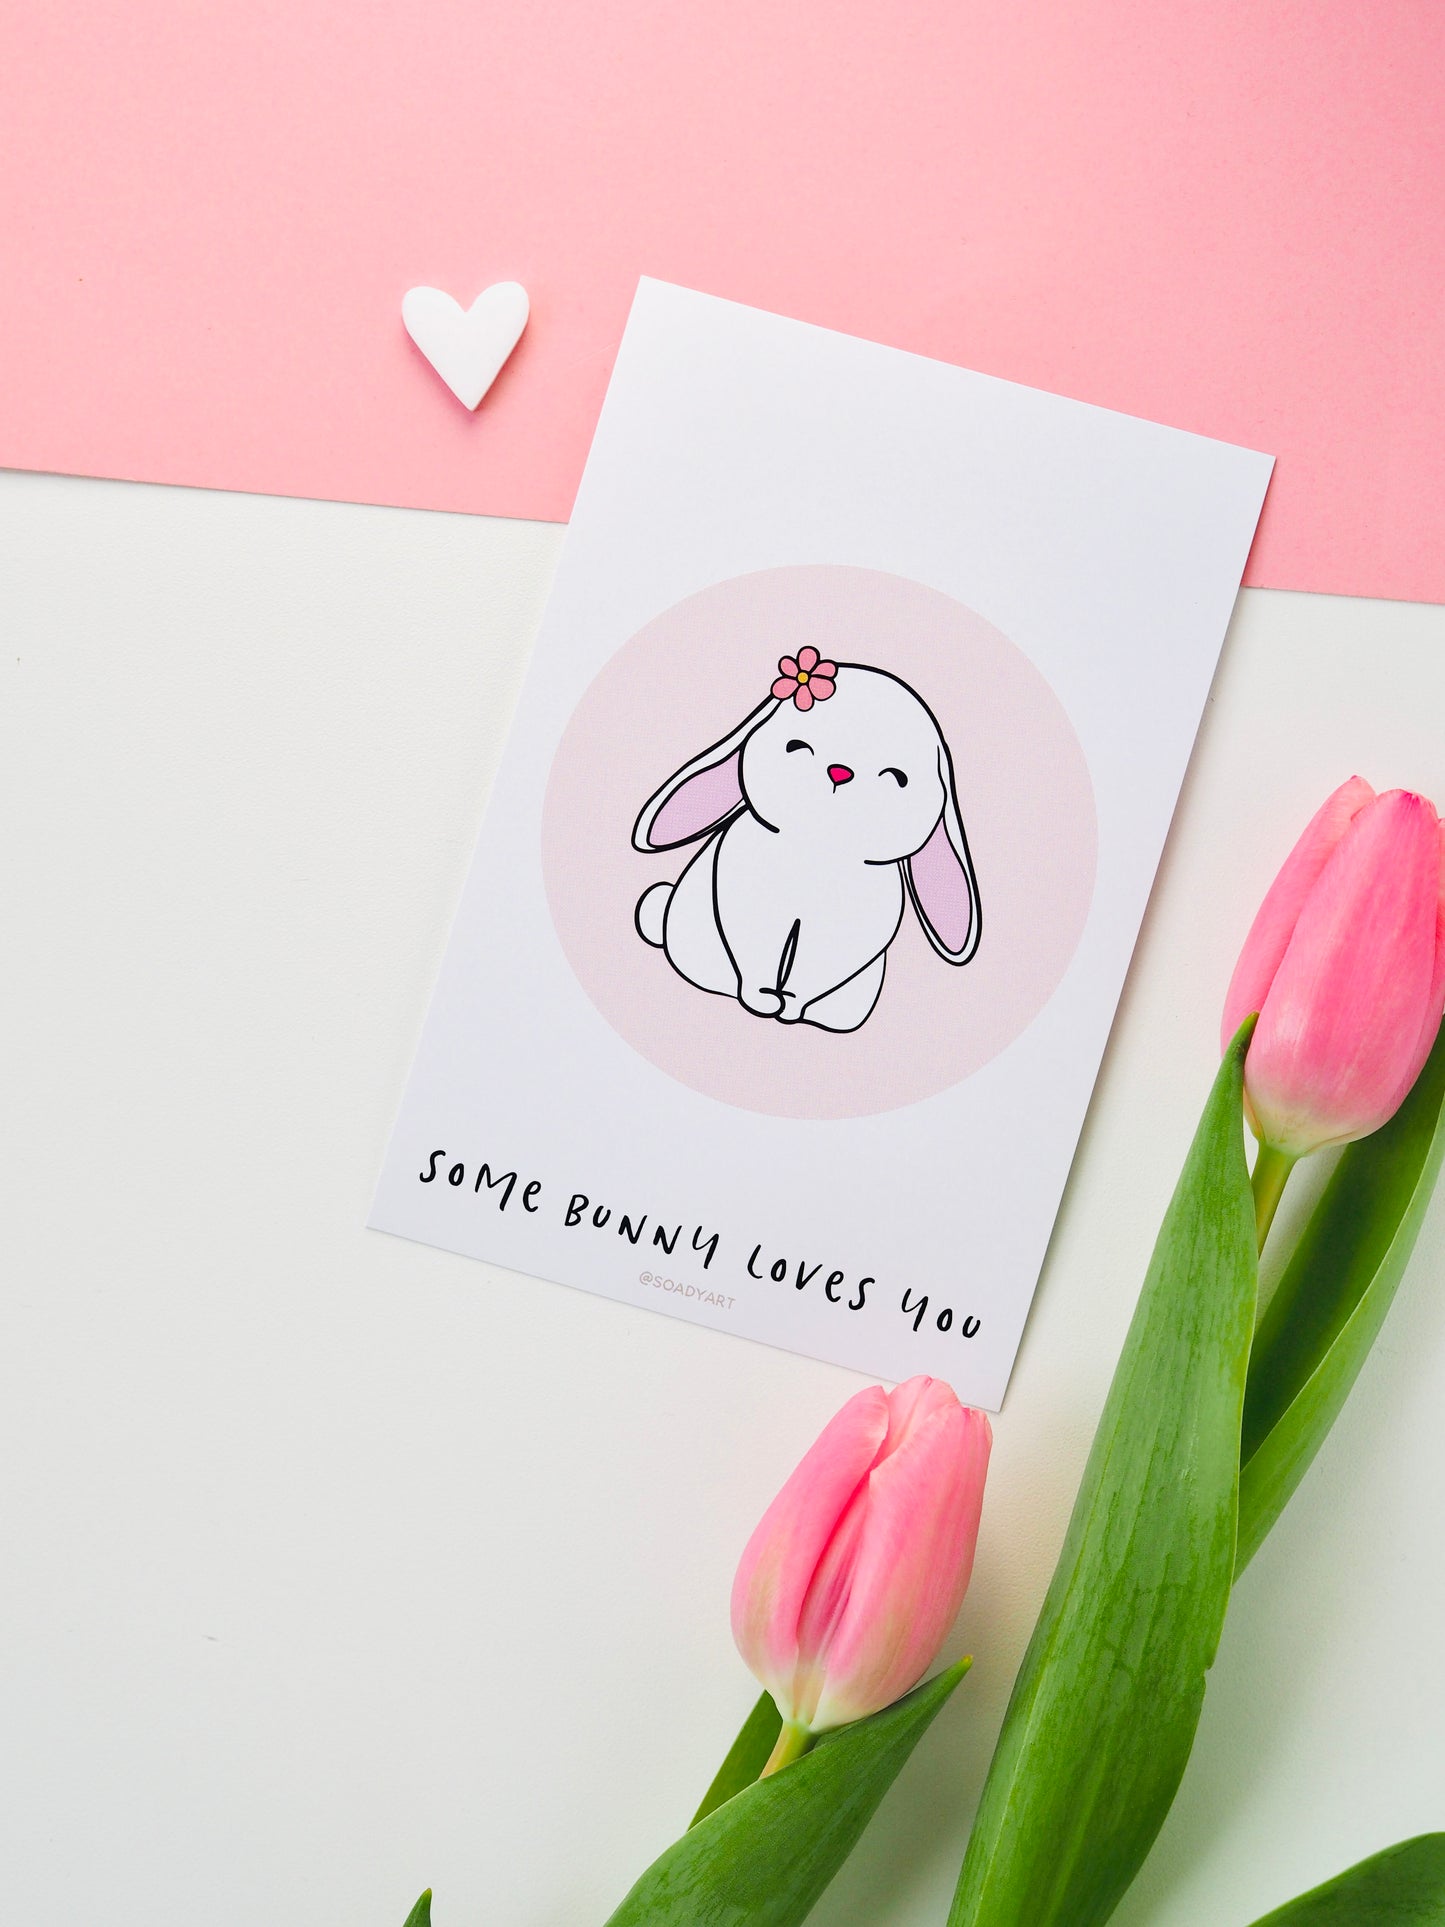 "Some bunny loves you" print